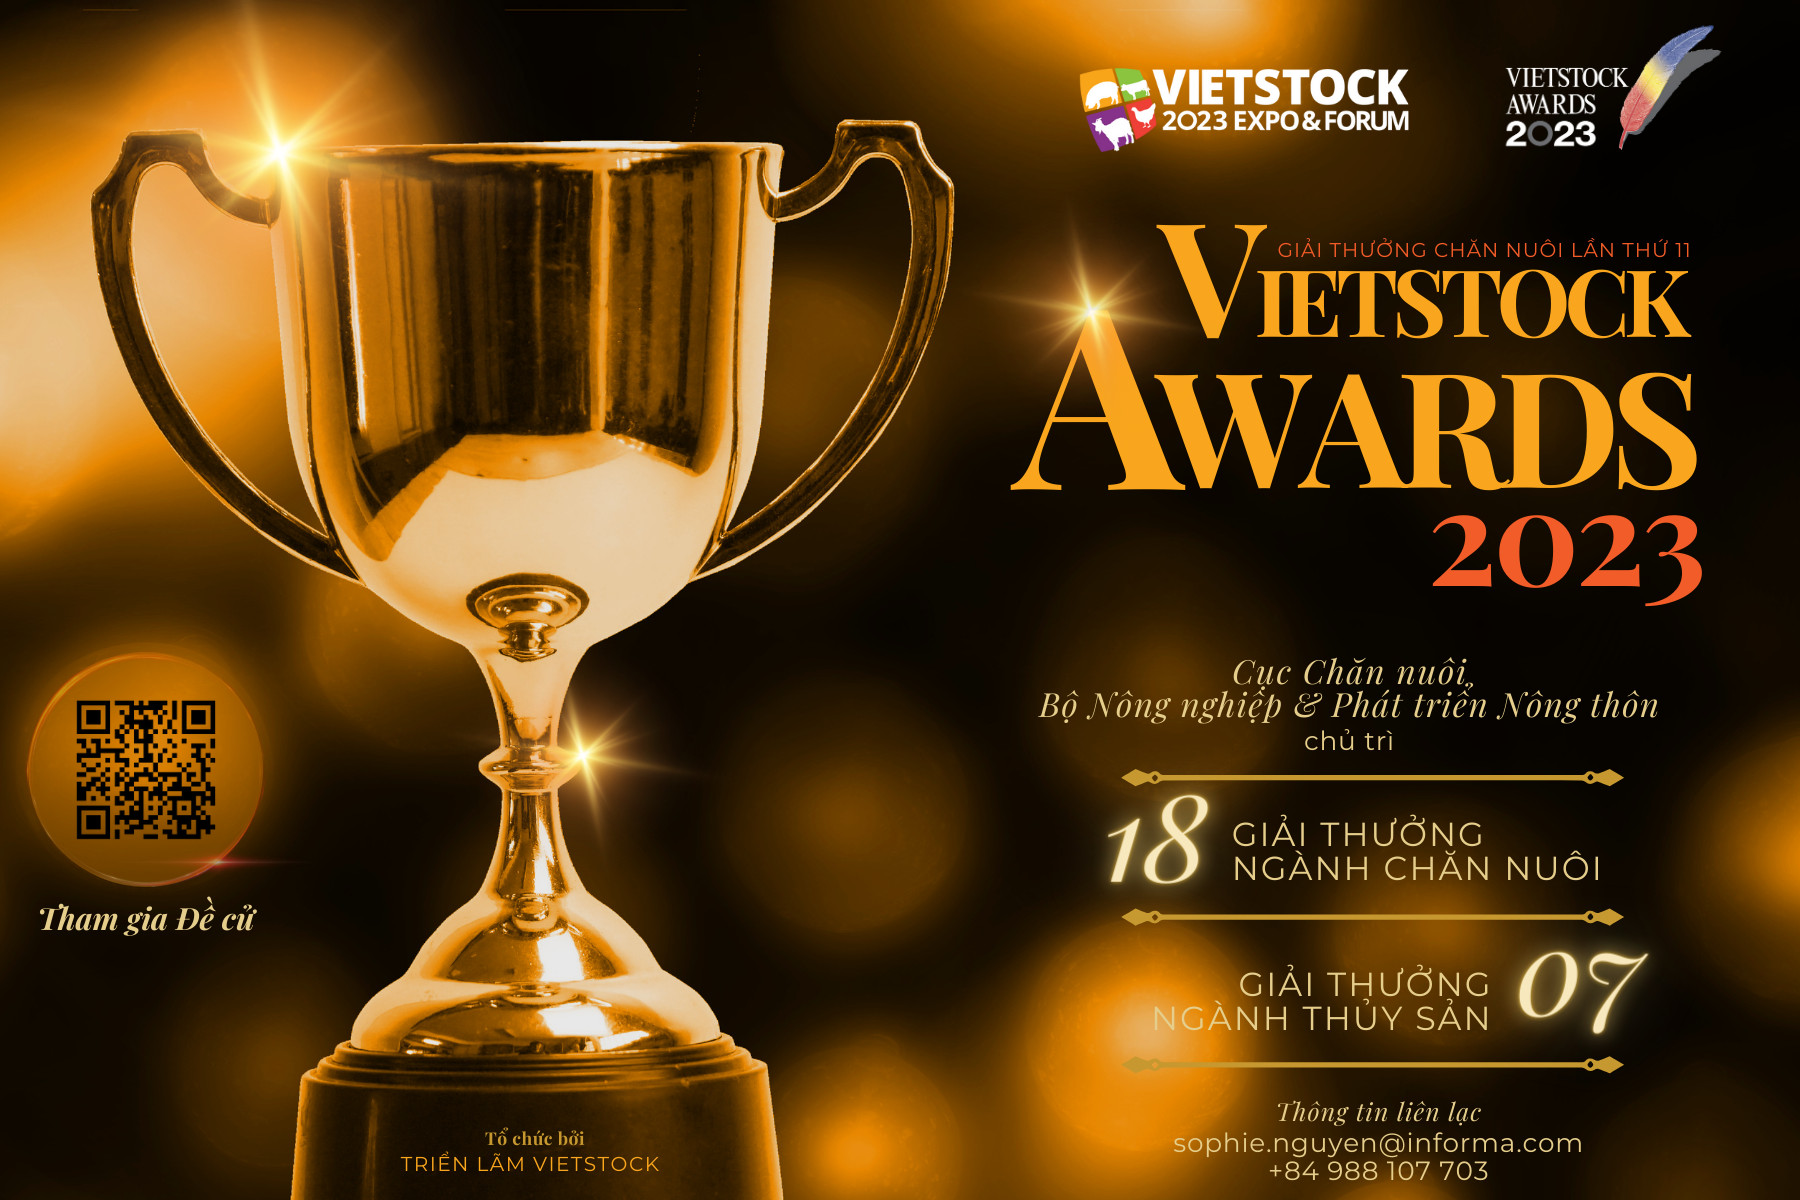 Endorsed by the Department of Livestock Production - The Ministry of Agriculture and Rural Development, the prestigious VIETSTOCK AWARDS 2023 will honor typical businesses and organizations that have made many positive and meaningful activities to the Vietnam’s livestock industry. Nominations are now open! 